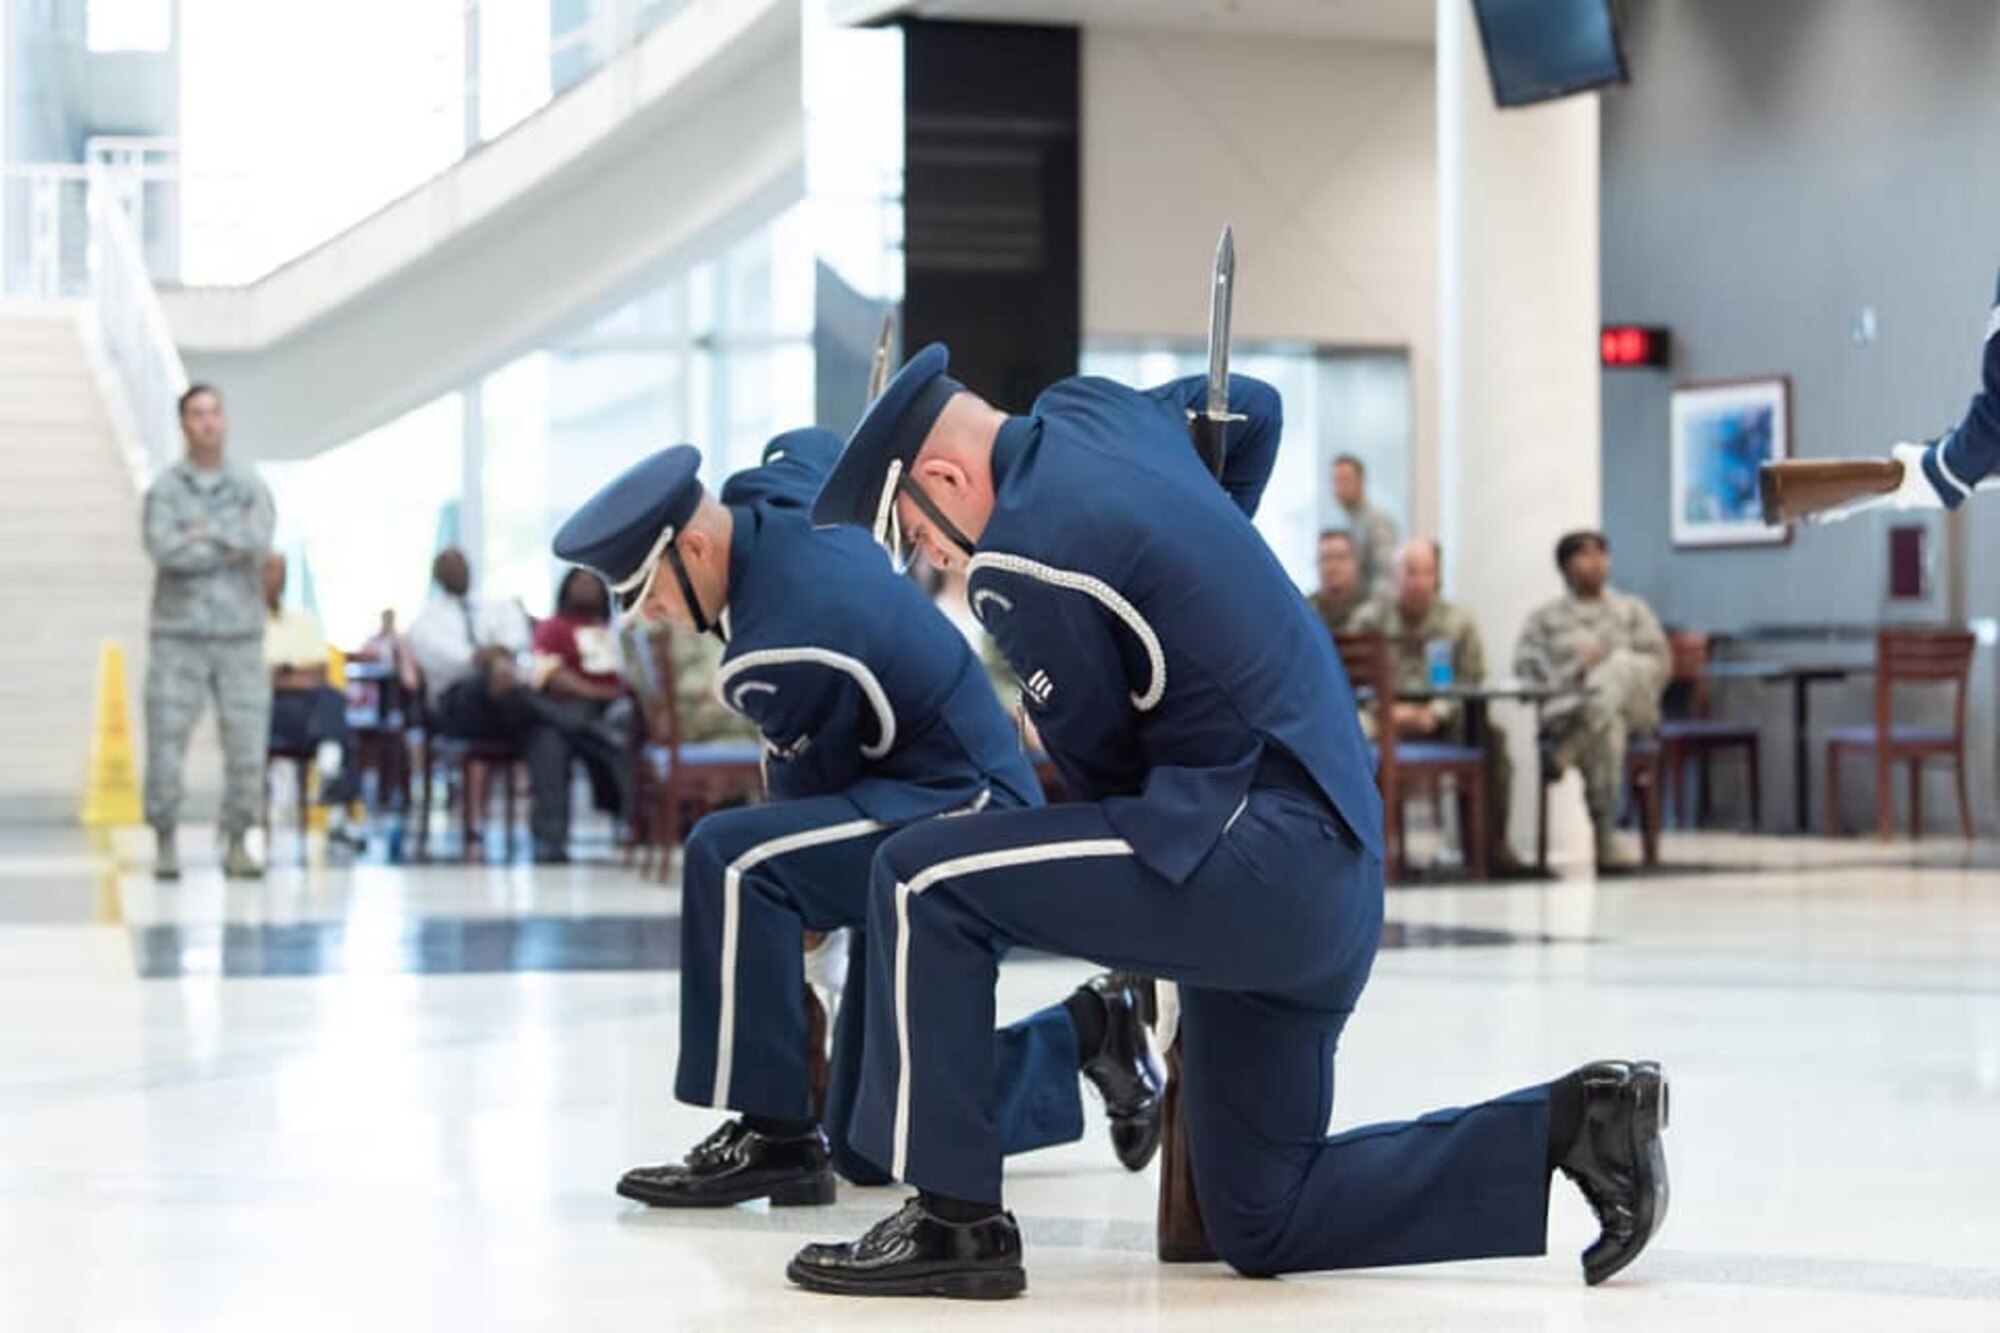 Members of the U.S. Air Force Honor Guard post the colors at the start of the Air Force 72nd Birthday celebration Sept. 12 hosted by the Defense Threat Reduction Agency at Fort Belvoir, Virginia.